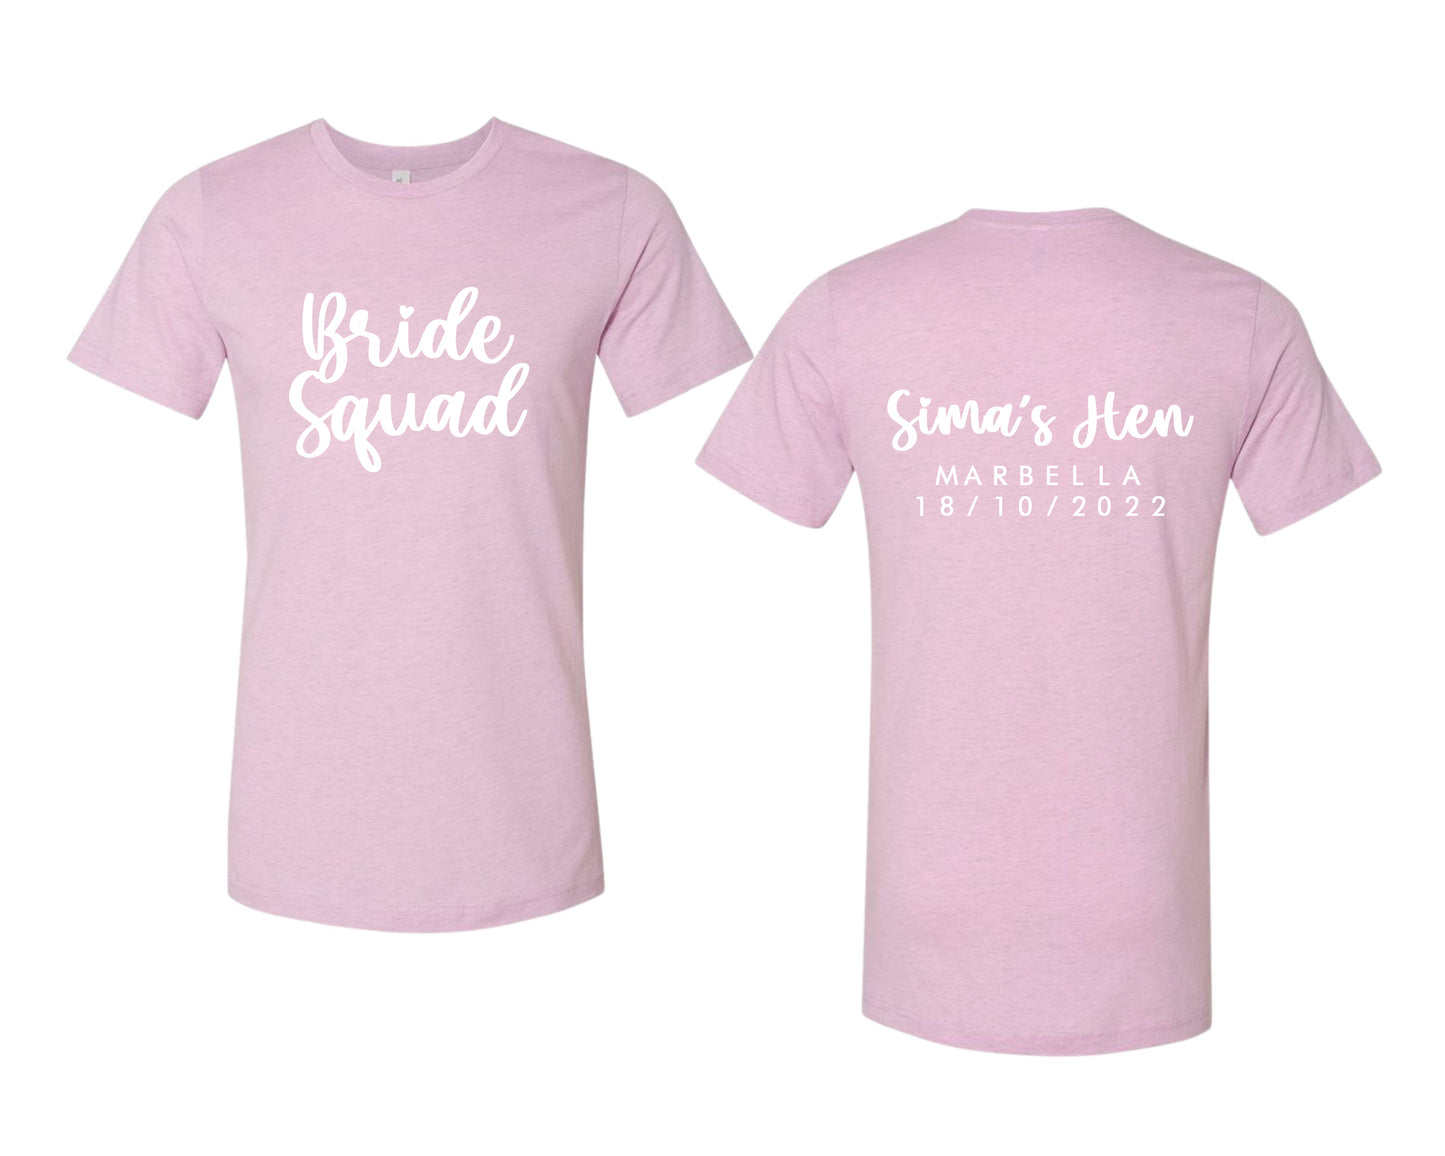 matching personalized 'BRIDE SQUAD' Hen Party T-shirts